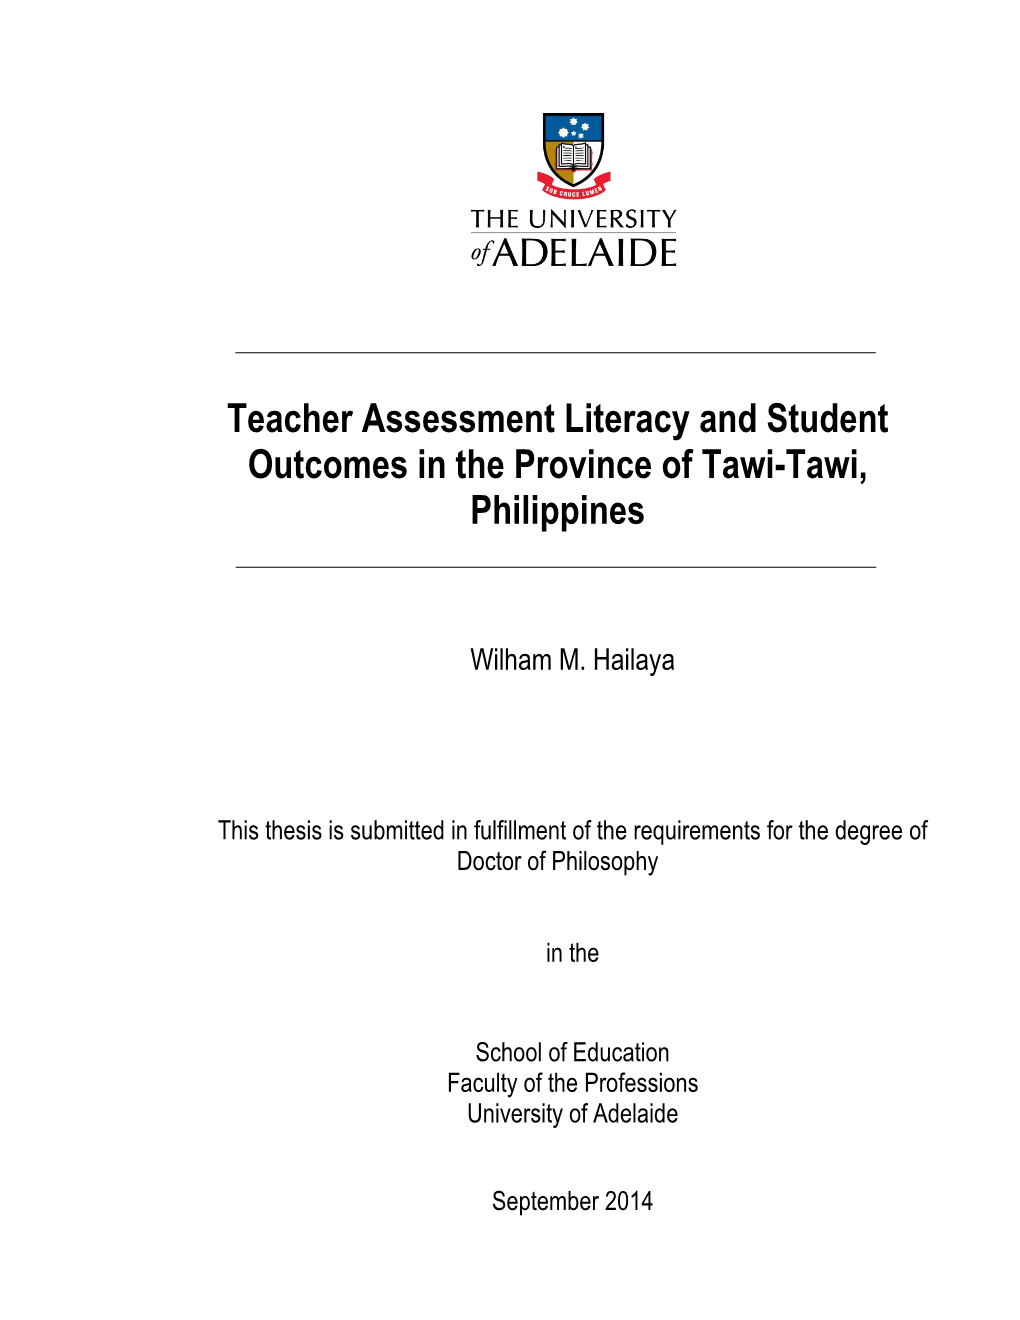 Teacher Assessment Literacy and Student Outcomes in the Province of Tawi-Tawi, Philippines